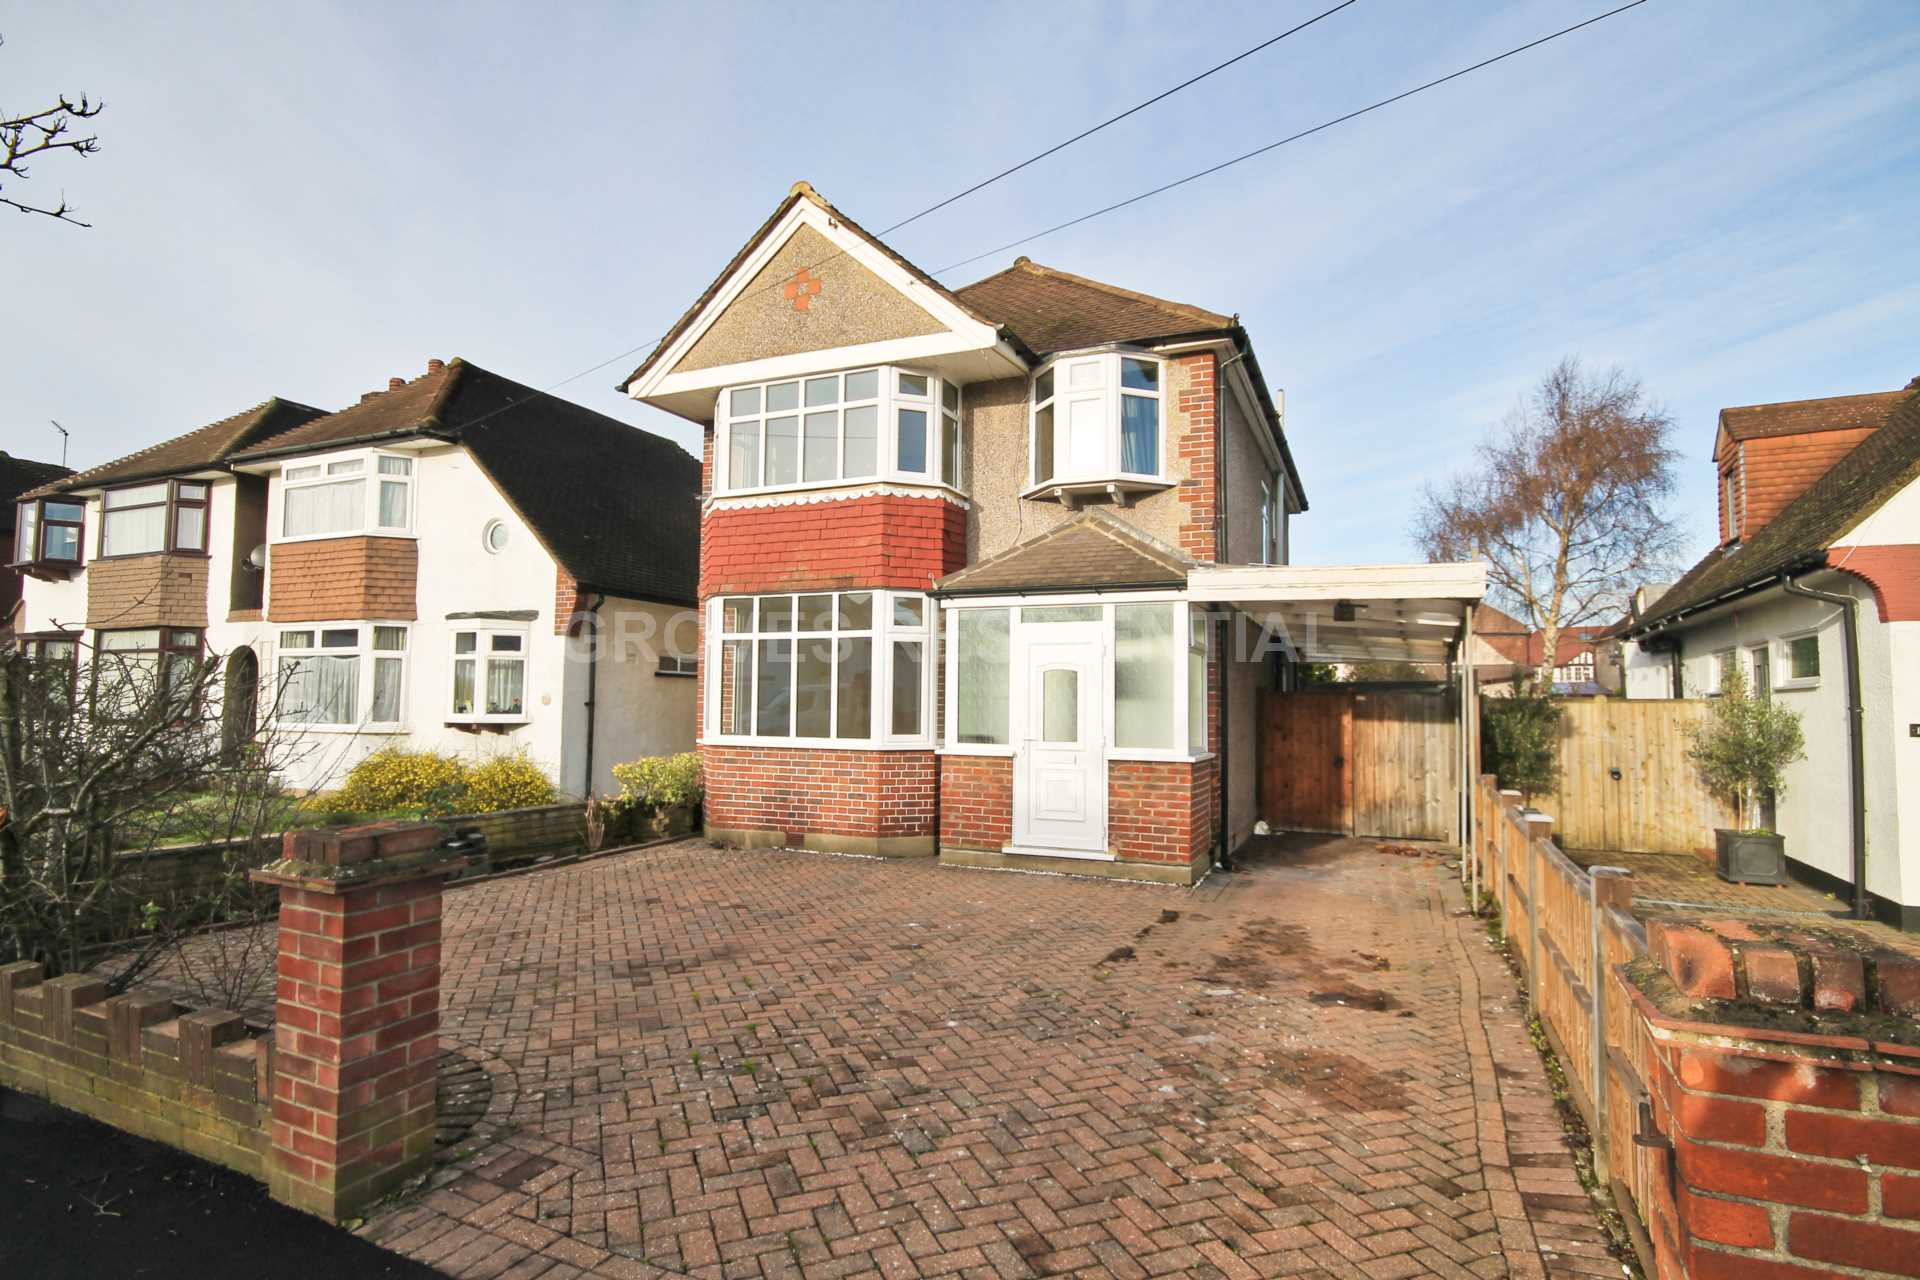 4 bed Detached House for rent in New Malden. From Groves Residential